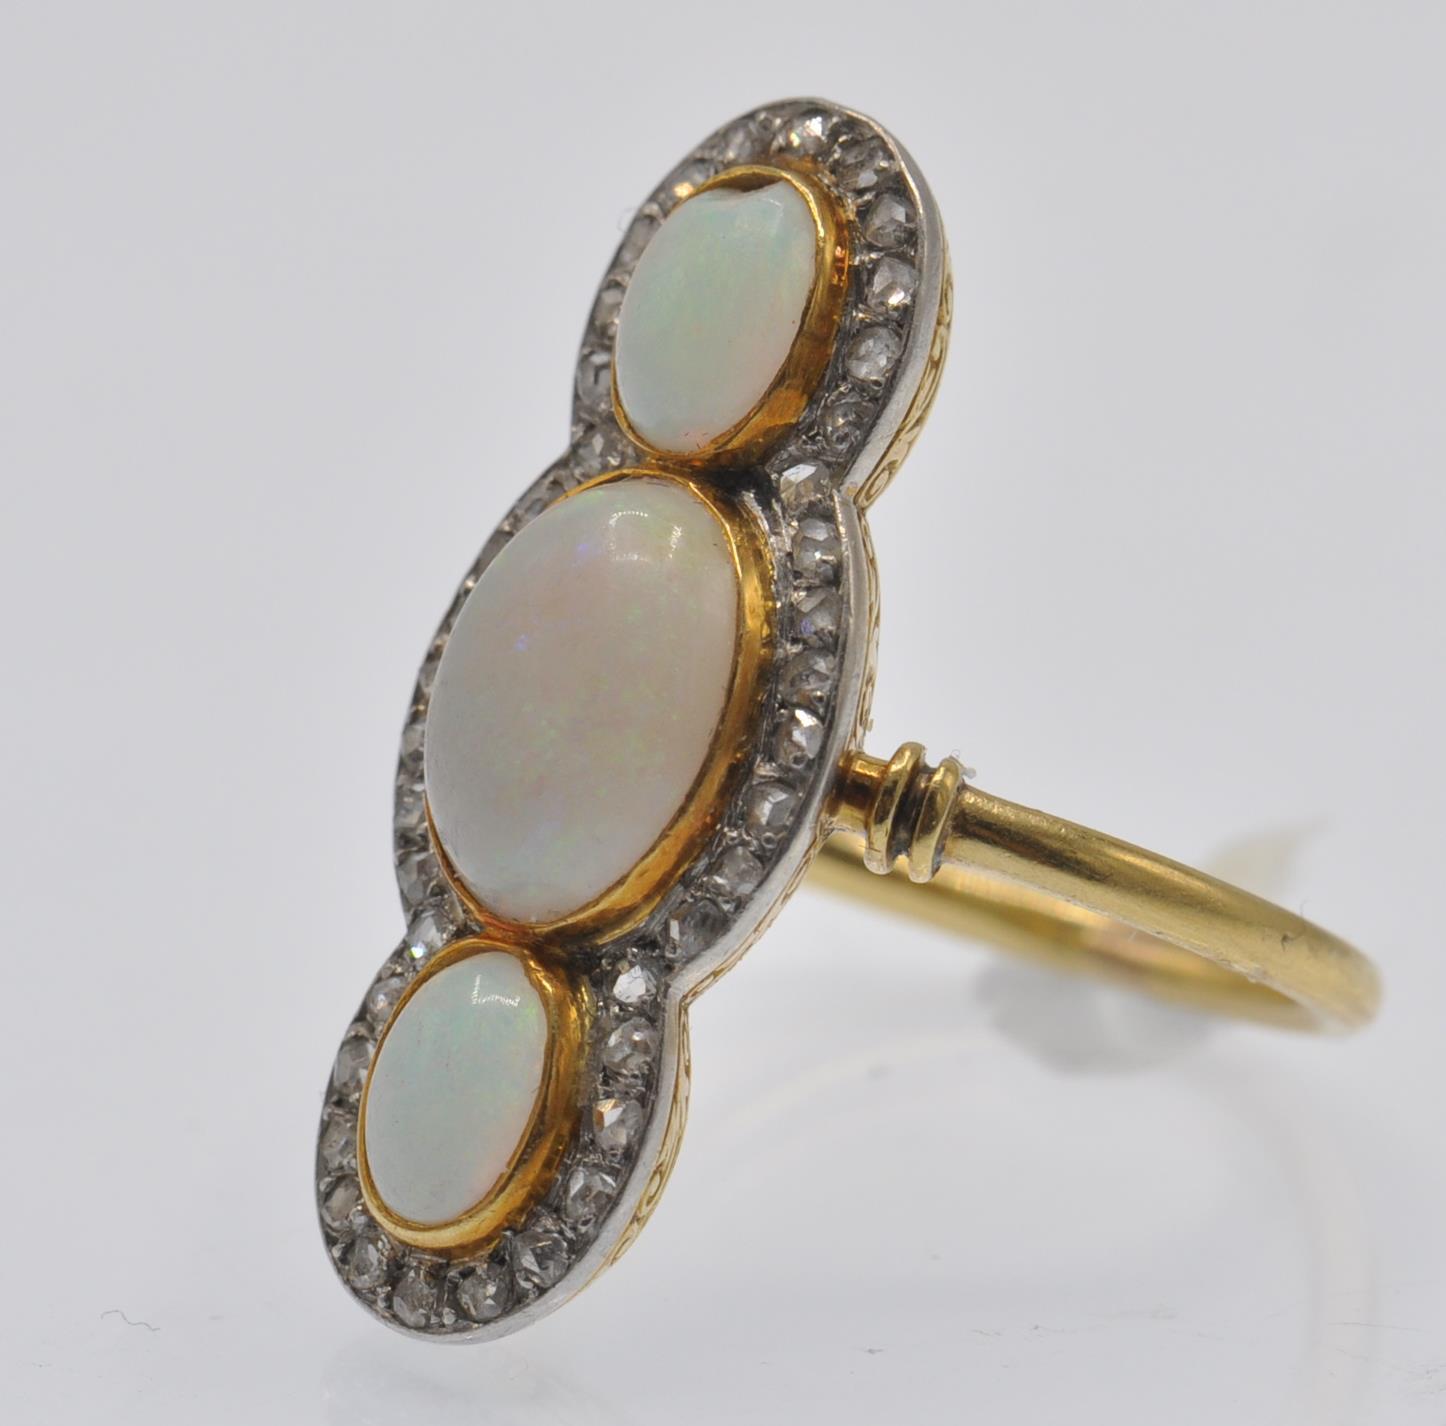 A French 18ct Gold Opal & Diamond 'Up Finger' Ring - Image 3 of 6